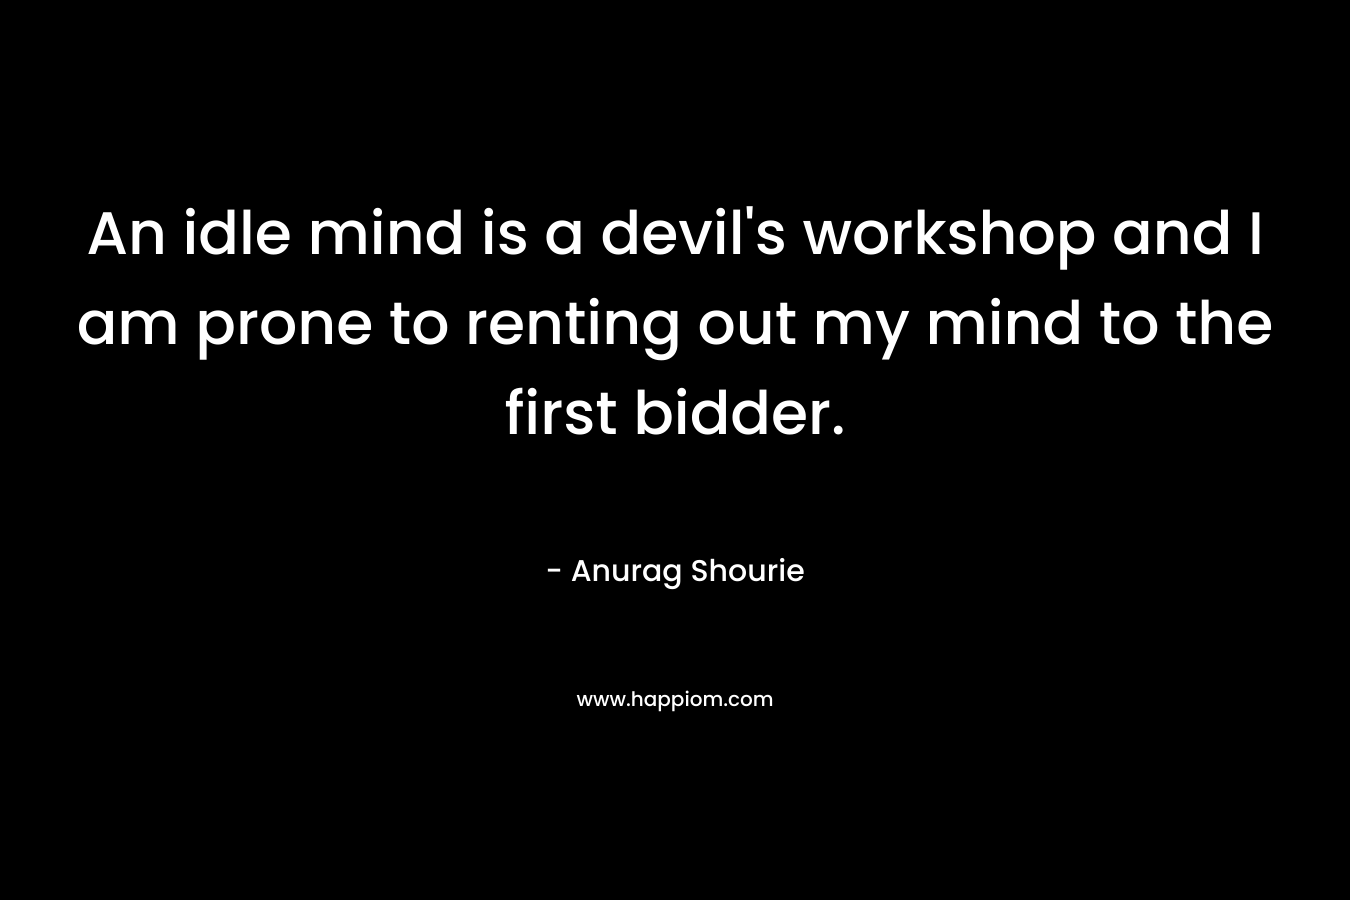 An idle mind is a devil's workshop and I am prone to renting out my mind to the first bidder.